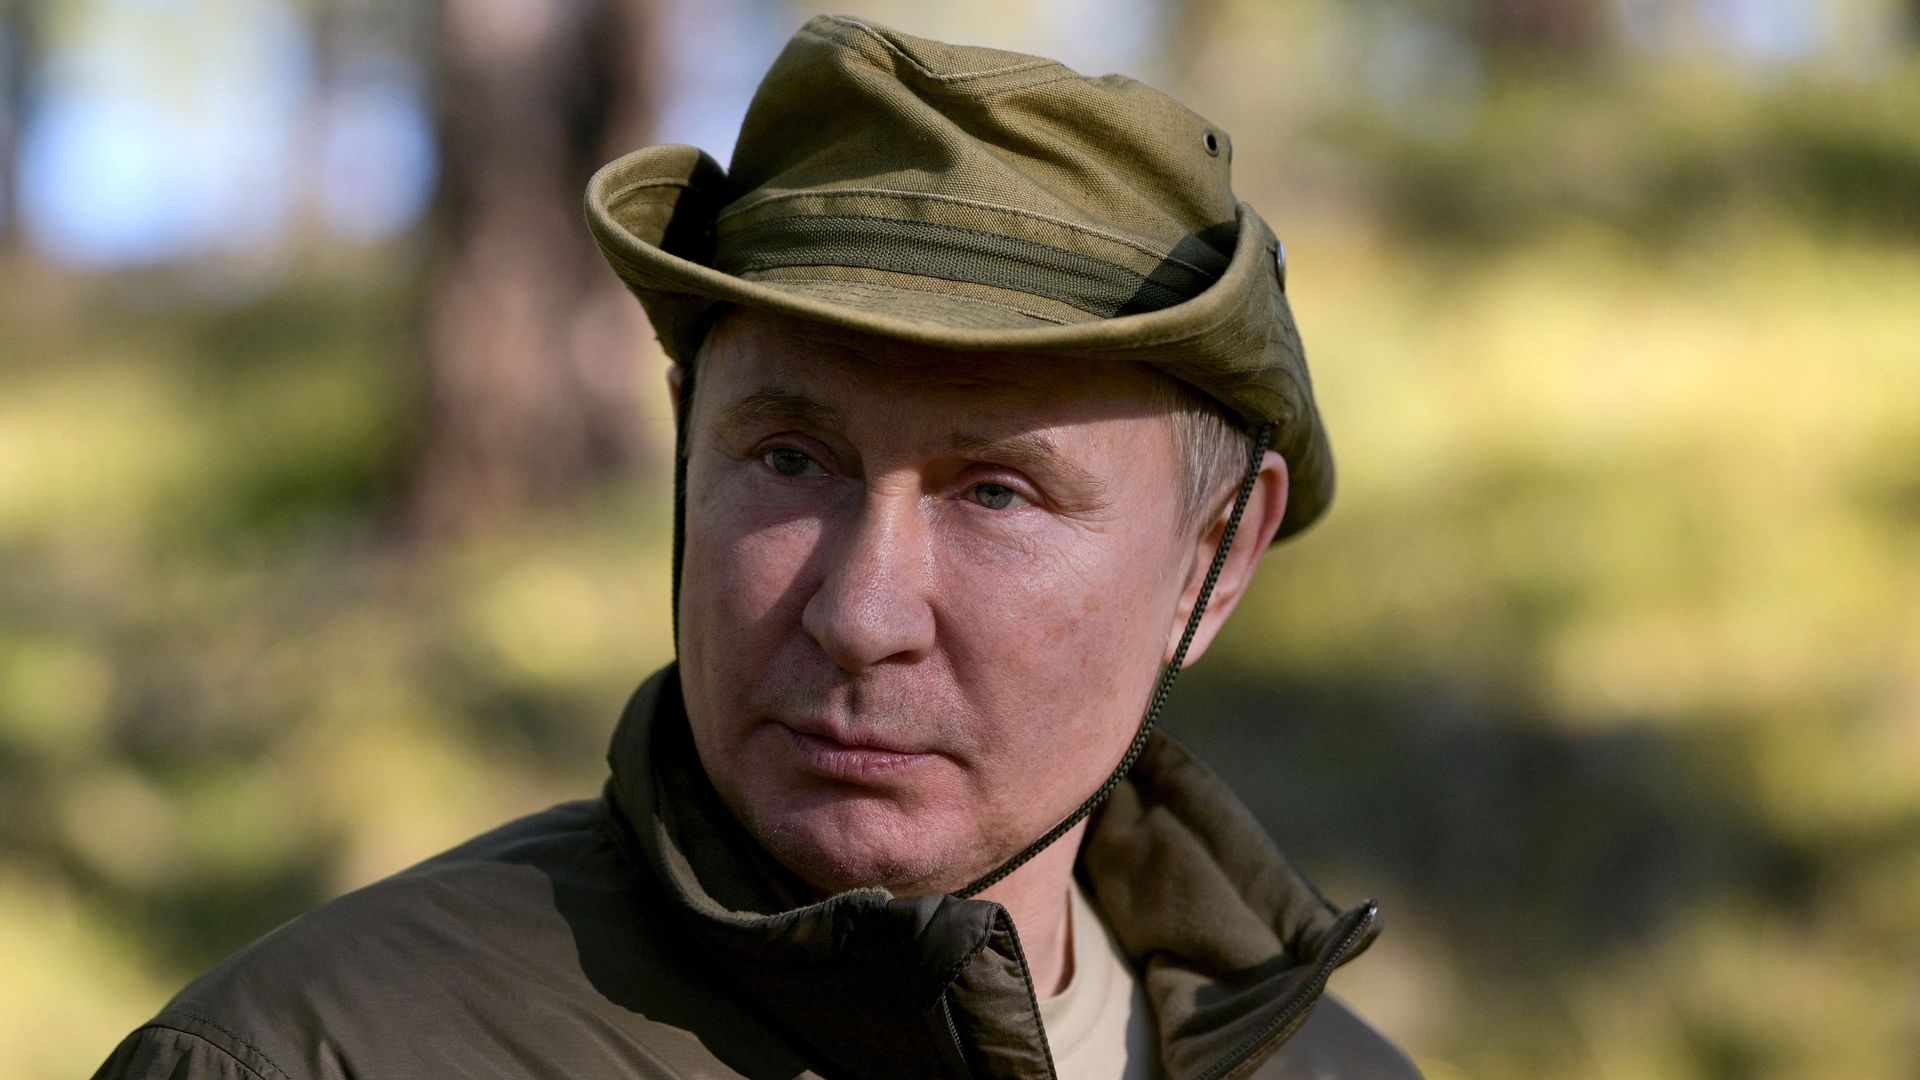 Russian President Vladimir Putin wears a khaki cowboy hat while on vacation in Siberia this month. 